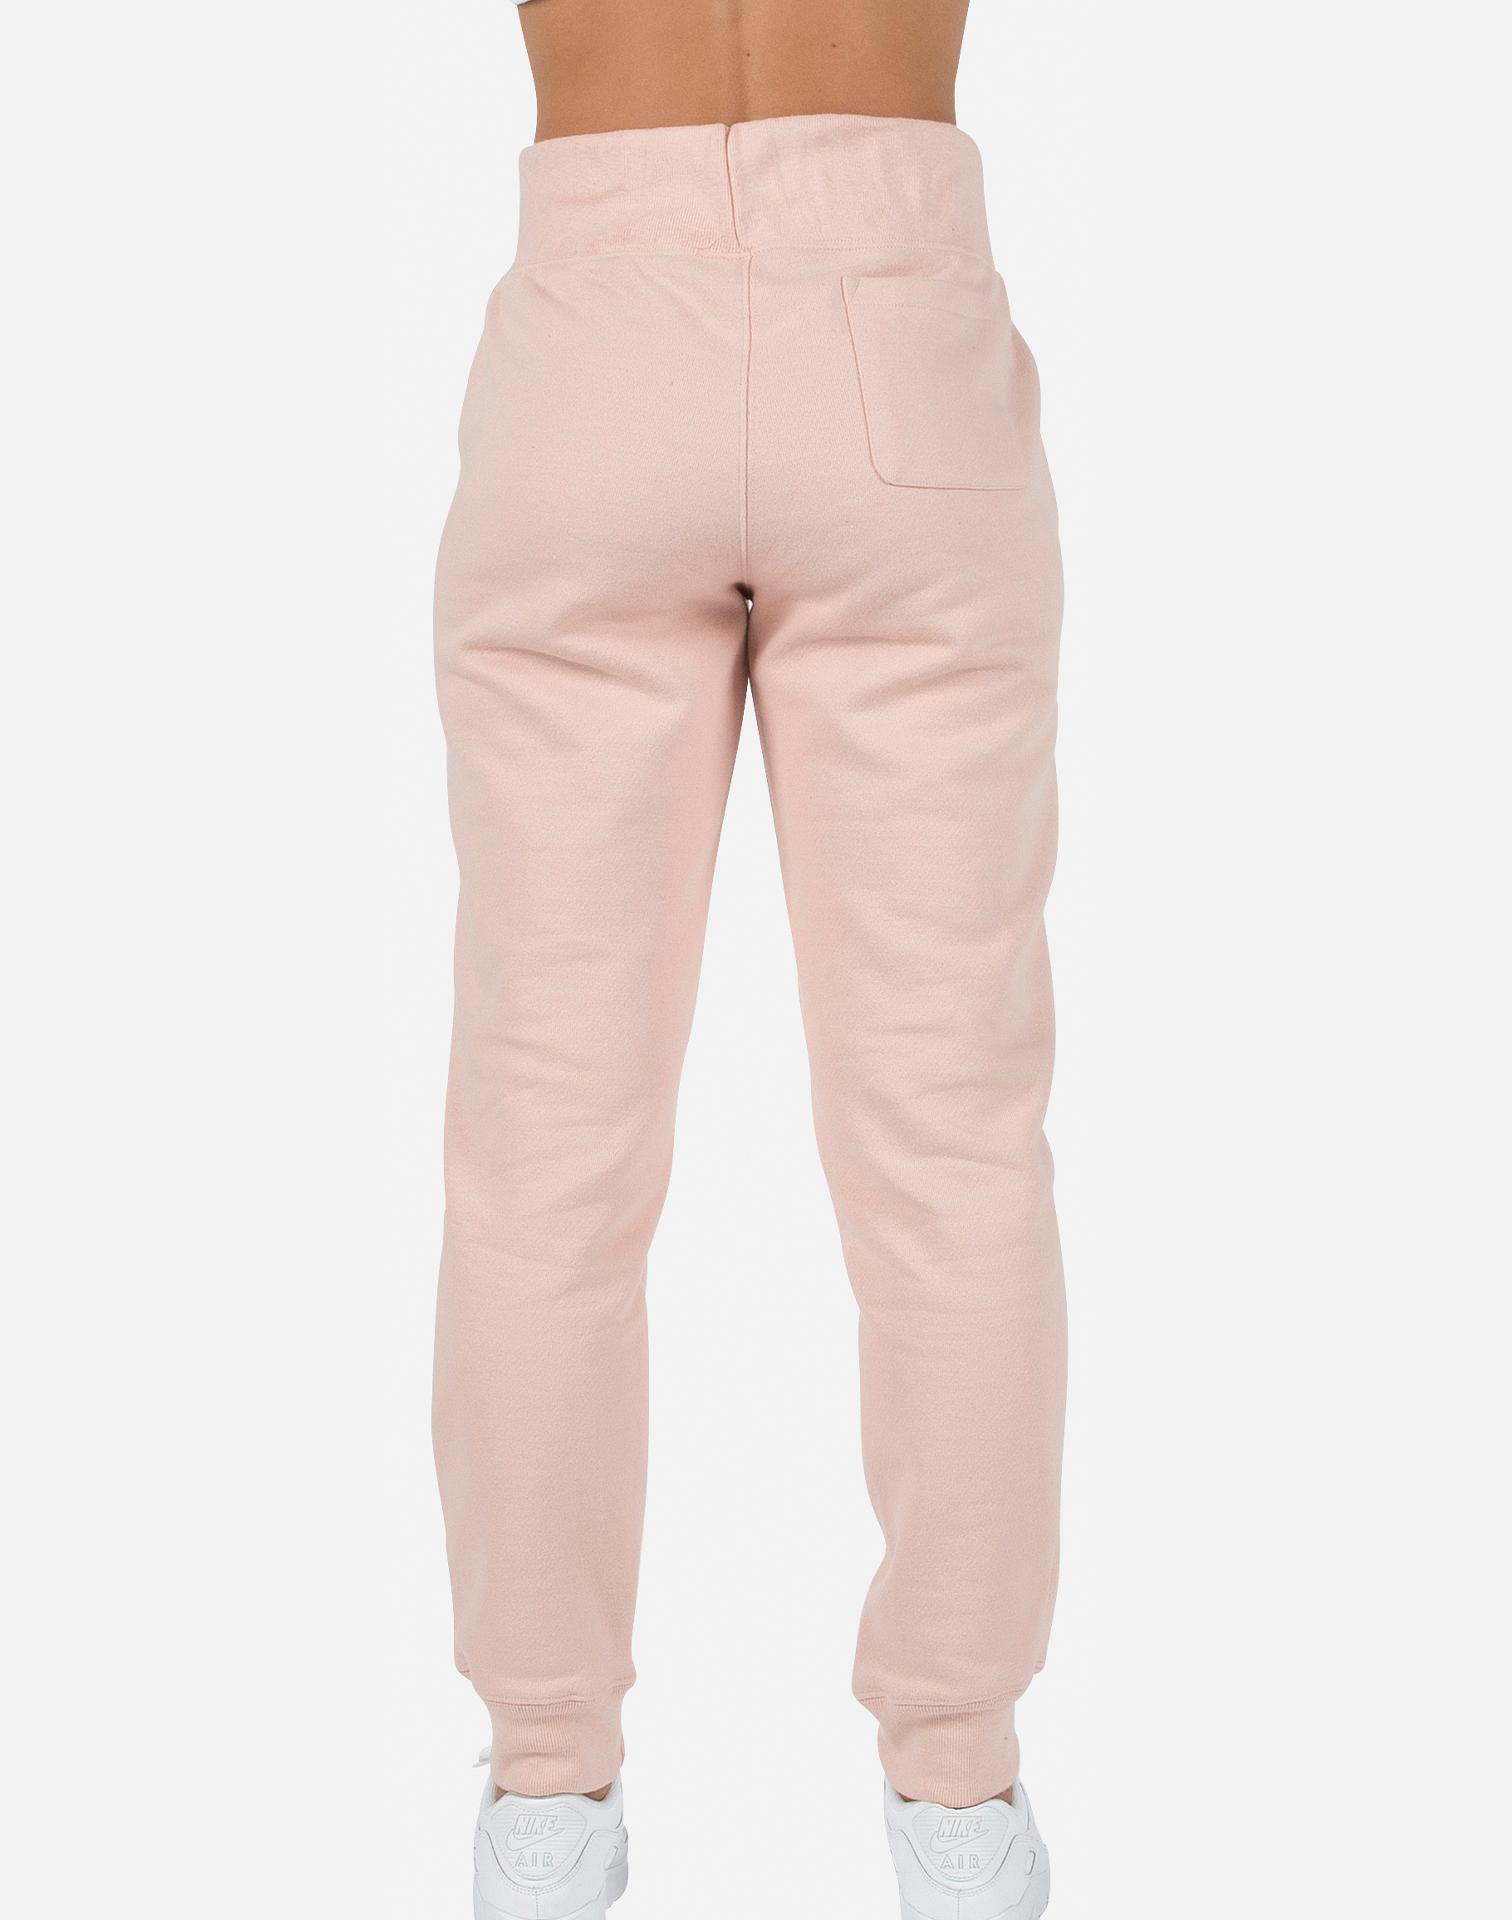 Champion C Logo Reverse Weave JOGGER Pants in Pink - Lyst